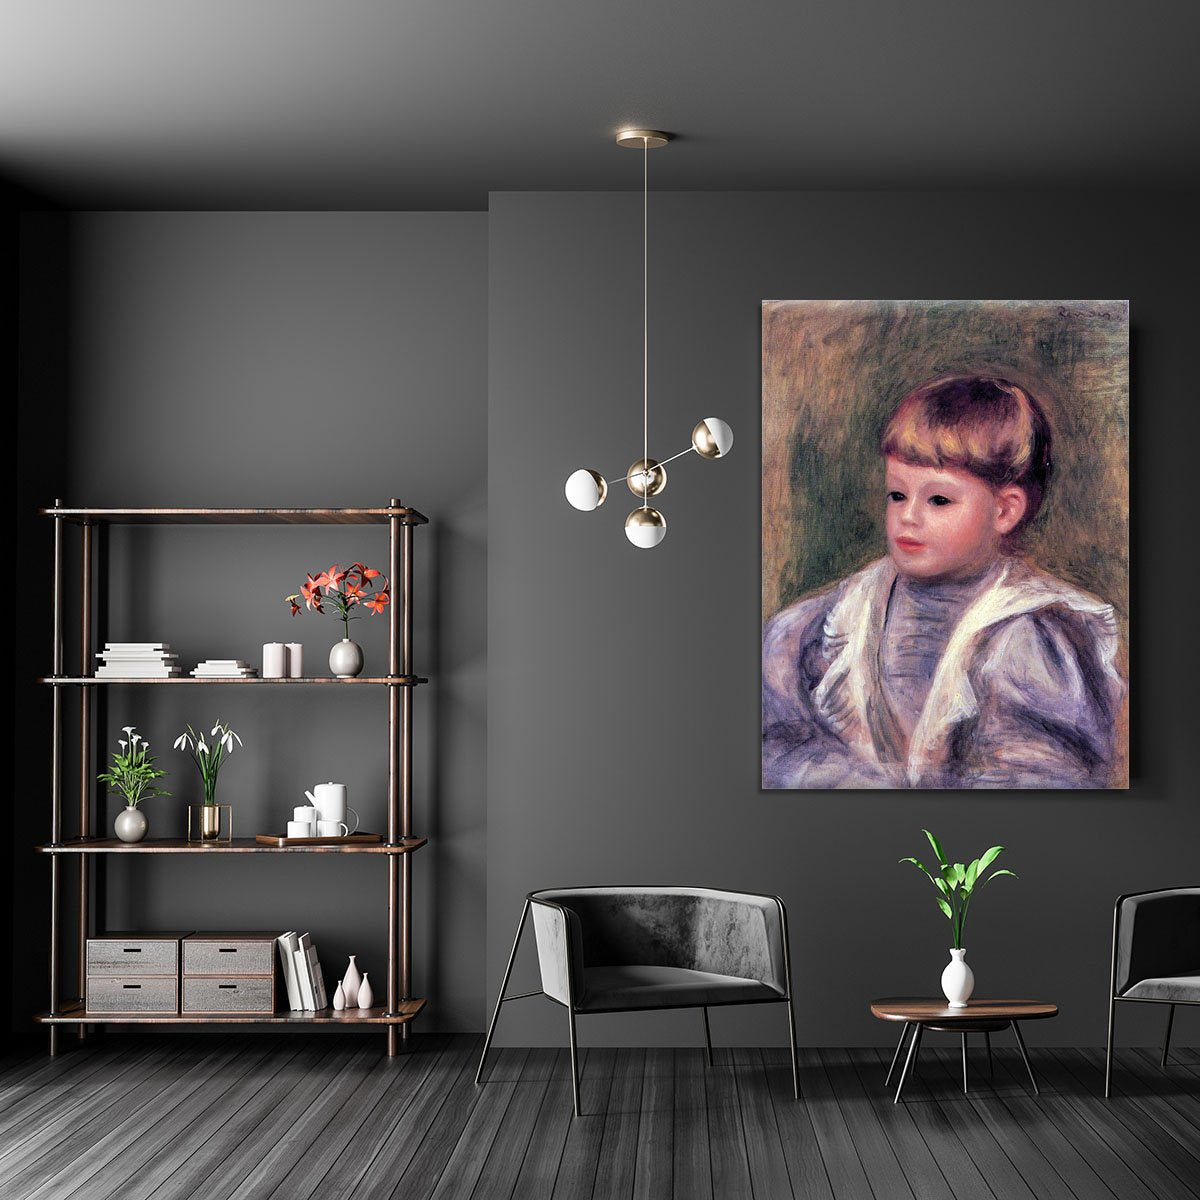 Portrait of a child Philippe Gangnat by Renoir Canvas Print or Poster